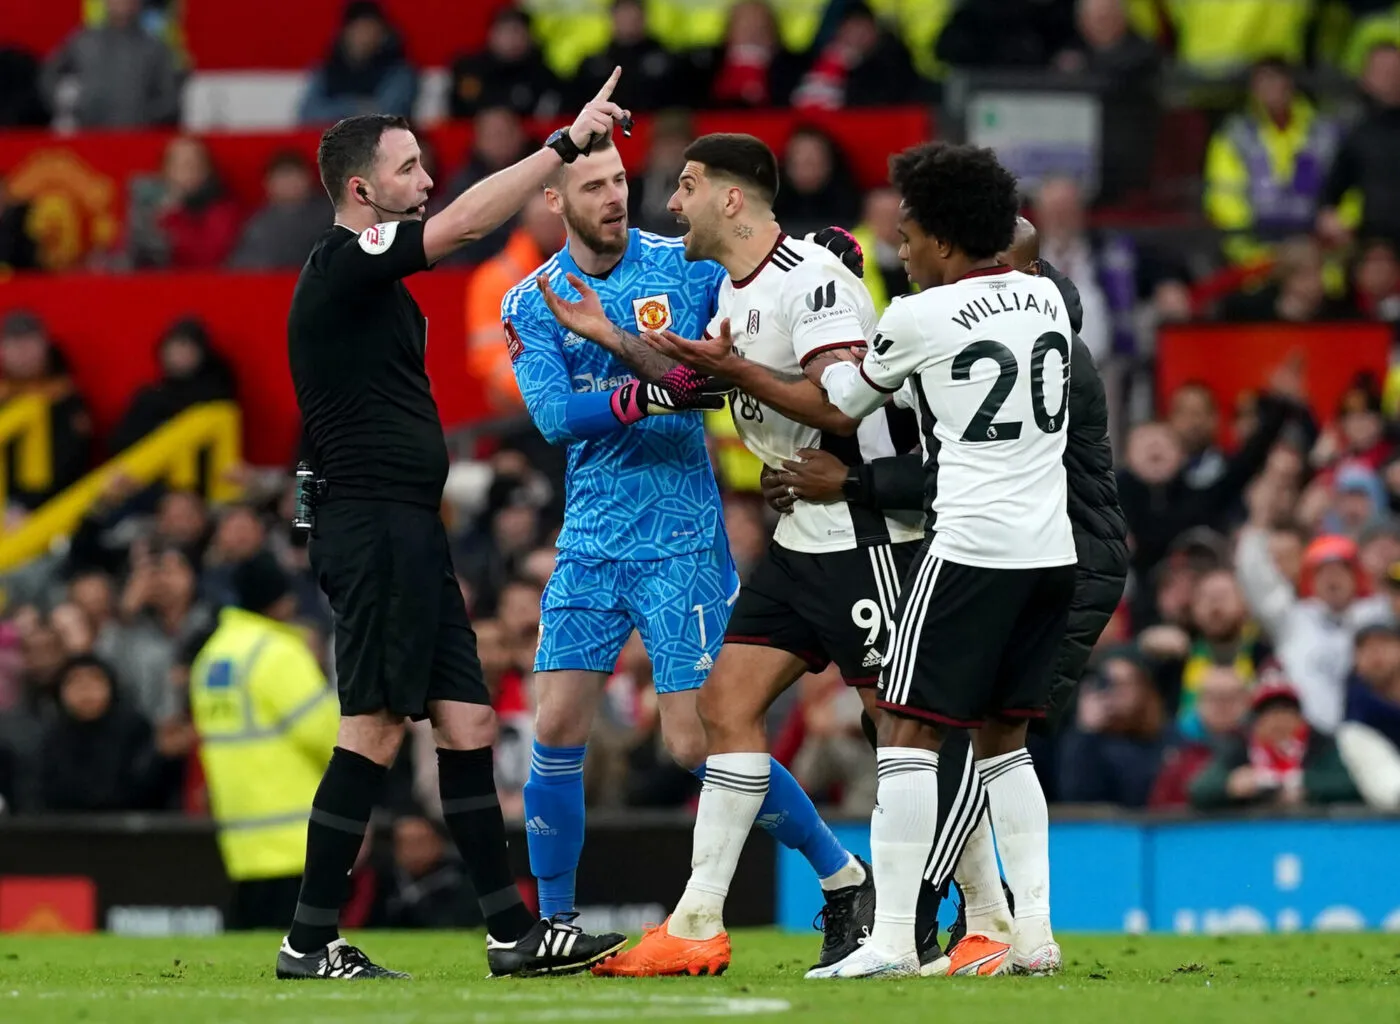 Fulham's Aleksandar Mitrovic (centre) is sent off by referee Chris Kavanagh during the Emirates FA Cup quarter-final match at Old Trafford, Manchester. Picture date: Sunday March 19, 2023. - Photo by Icon sport